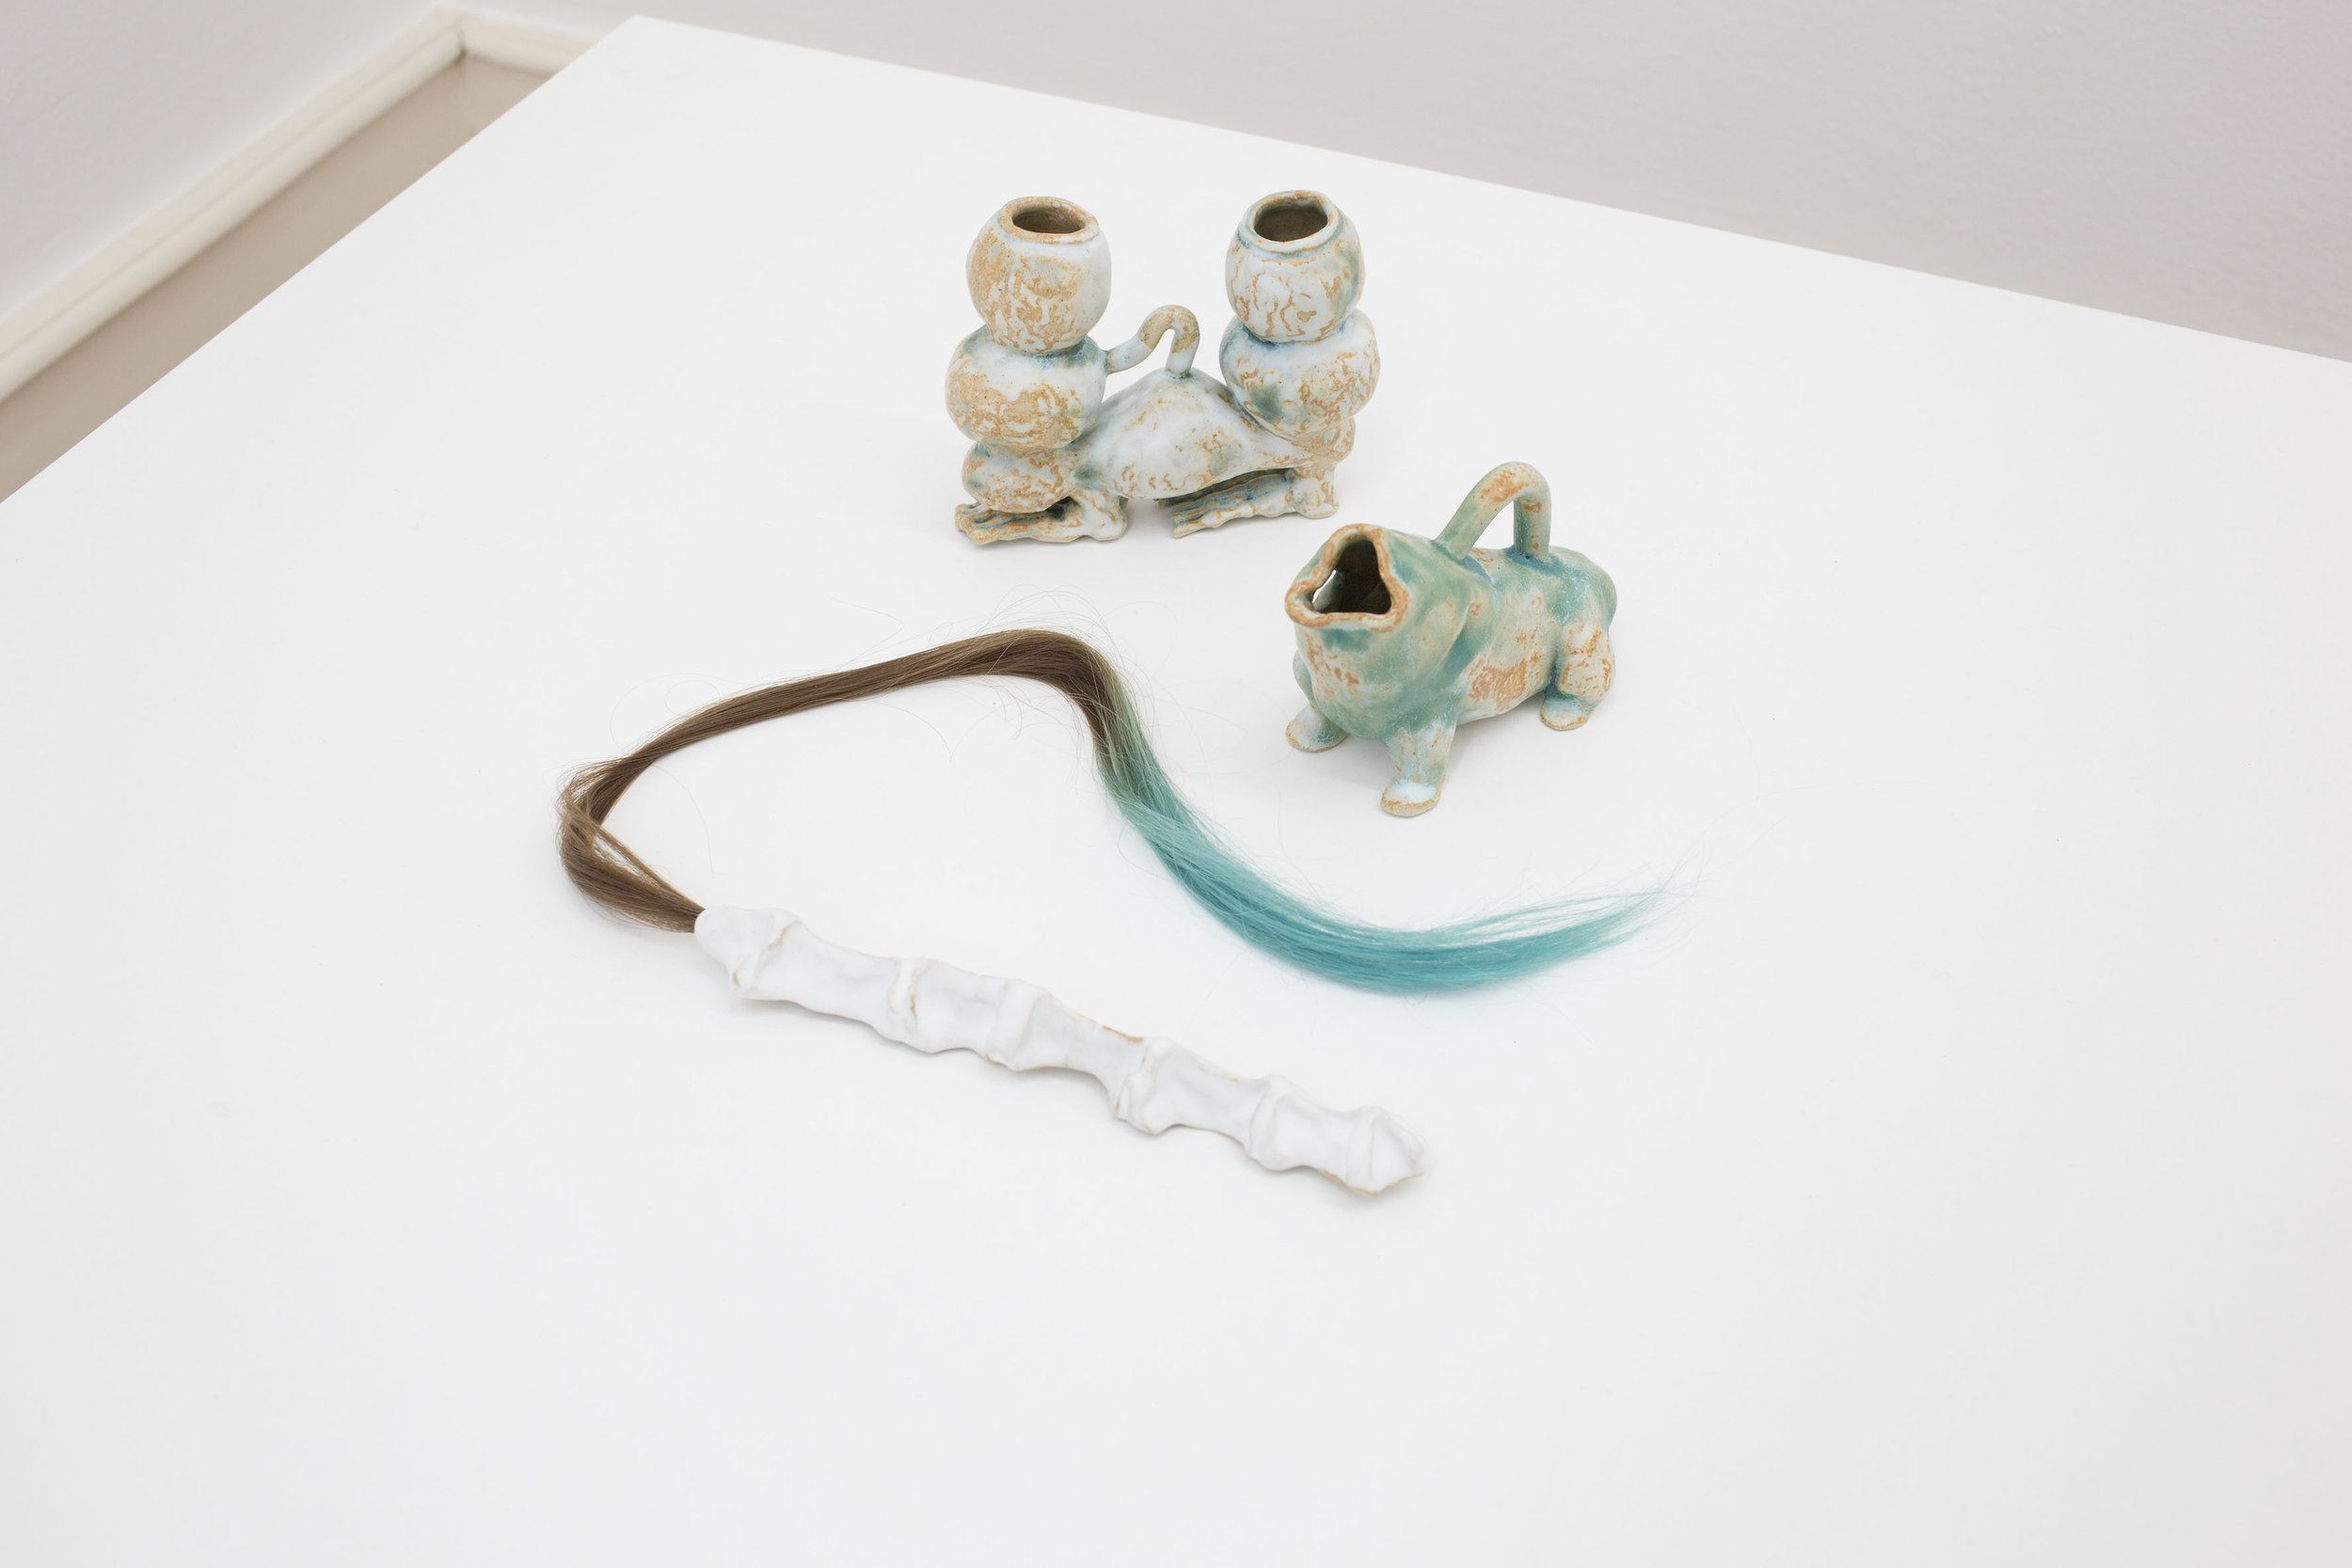  Ridiculous Accuracy In Our Time (part of series), 2016, tattoo arm warmer, ceramic, and hair extensions, Exhibition view at Kunsthaus Langenthal, Switzerland 